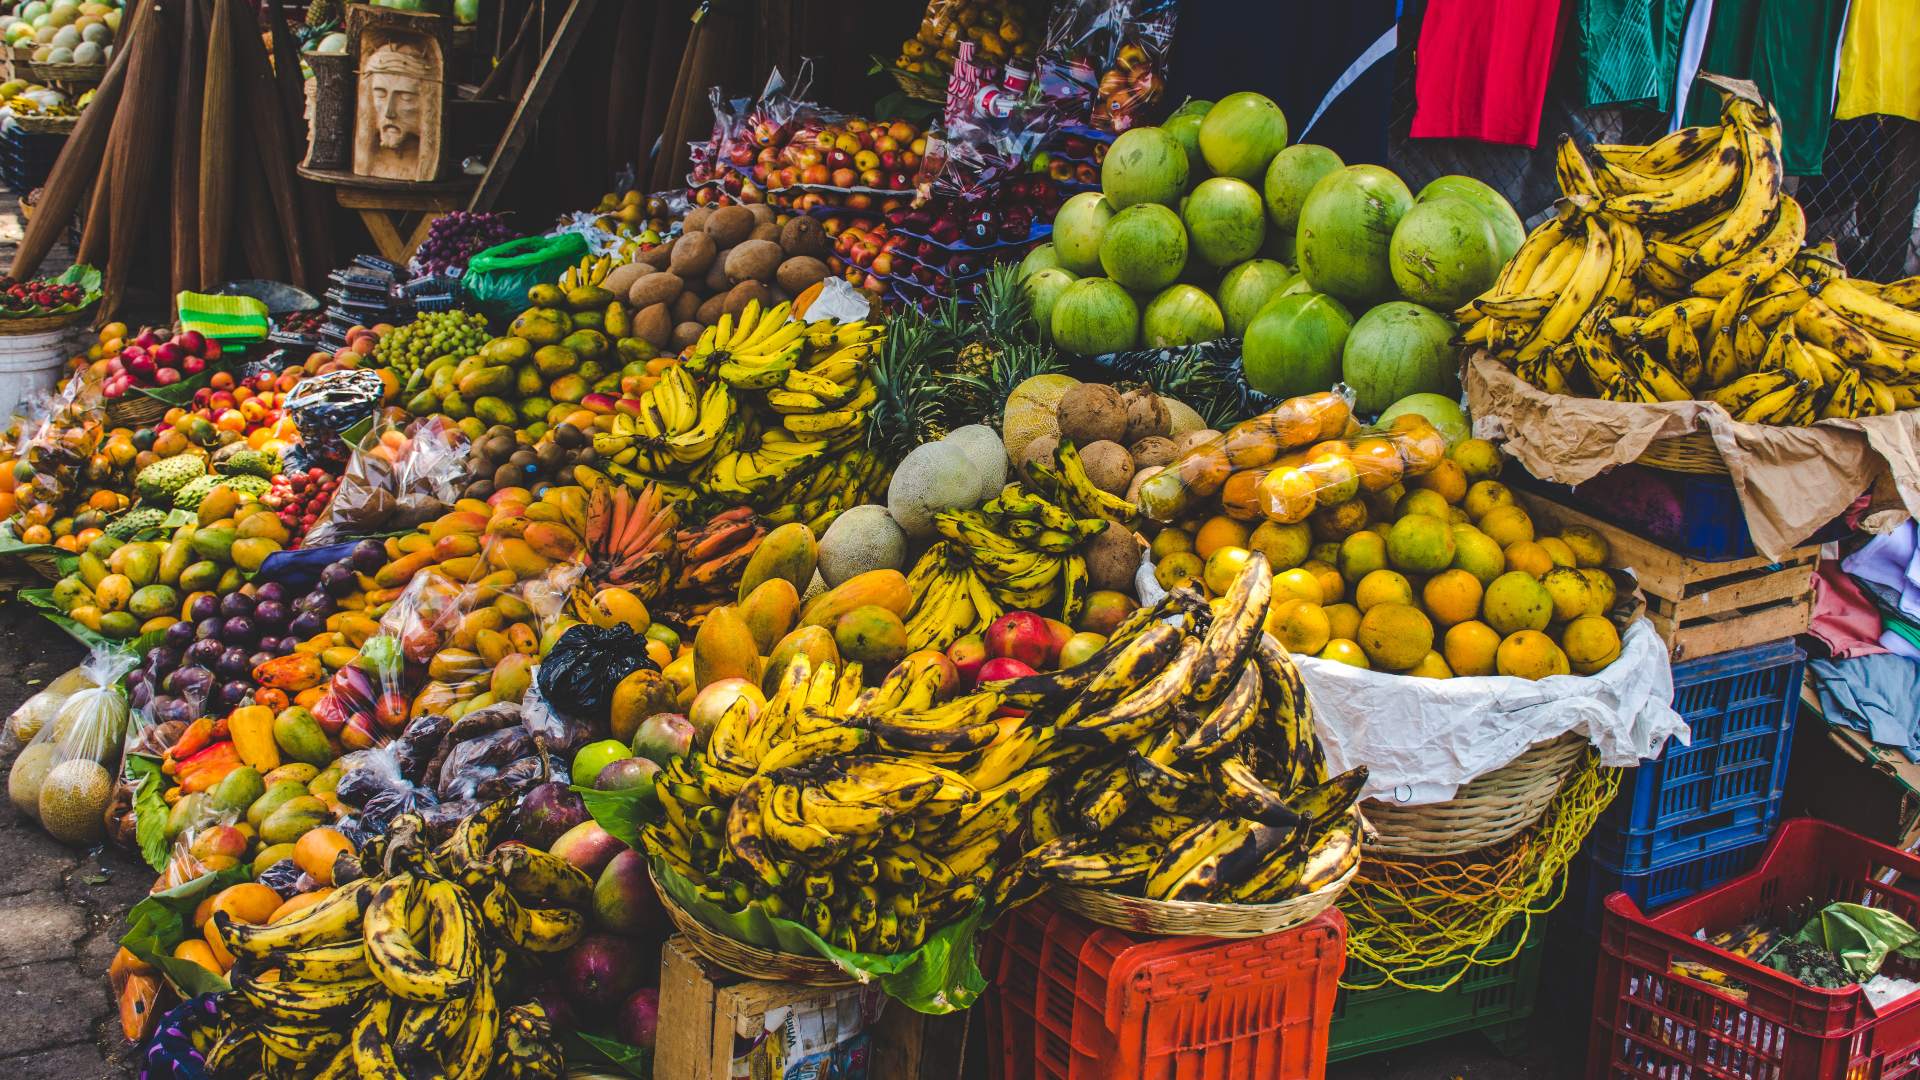 Market stall featuring stacks of fruit in Guatemala